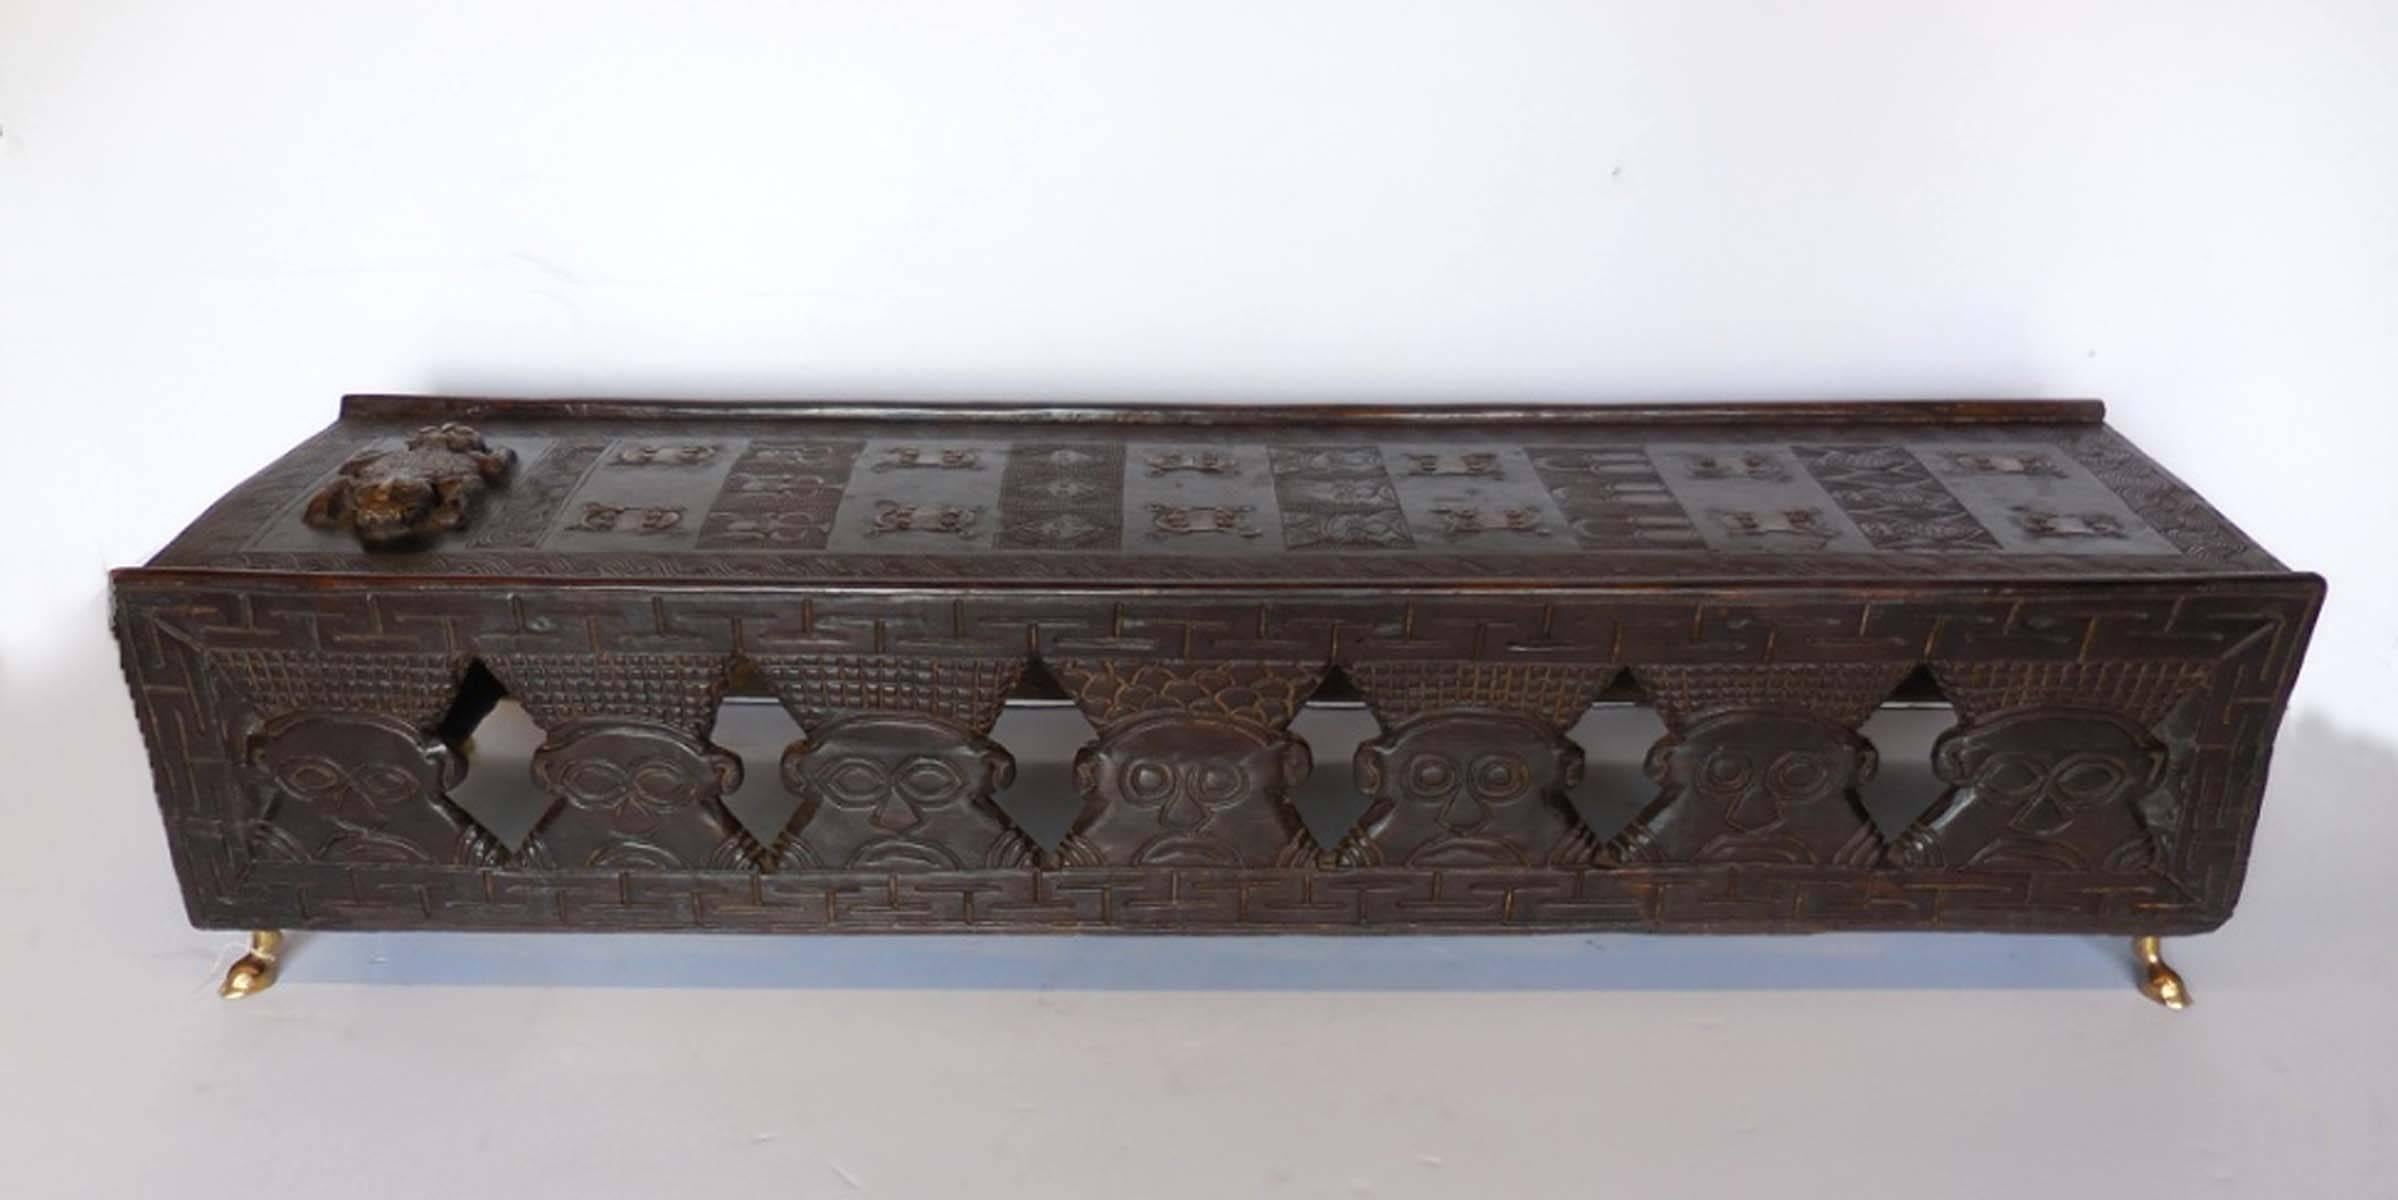 20th century hand-carved tribal bench from Cameroon. Stylized male figures and faces and bronze frogs along the top and both sides. Newer short bronze animal hoof legs. Works well as a coffee table or bench.